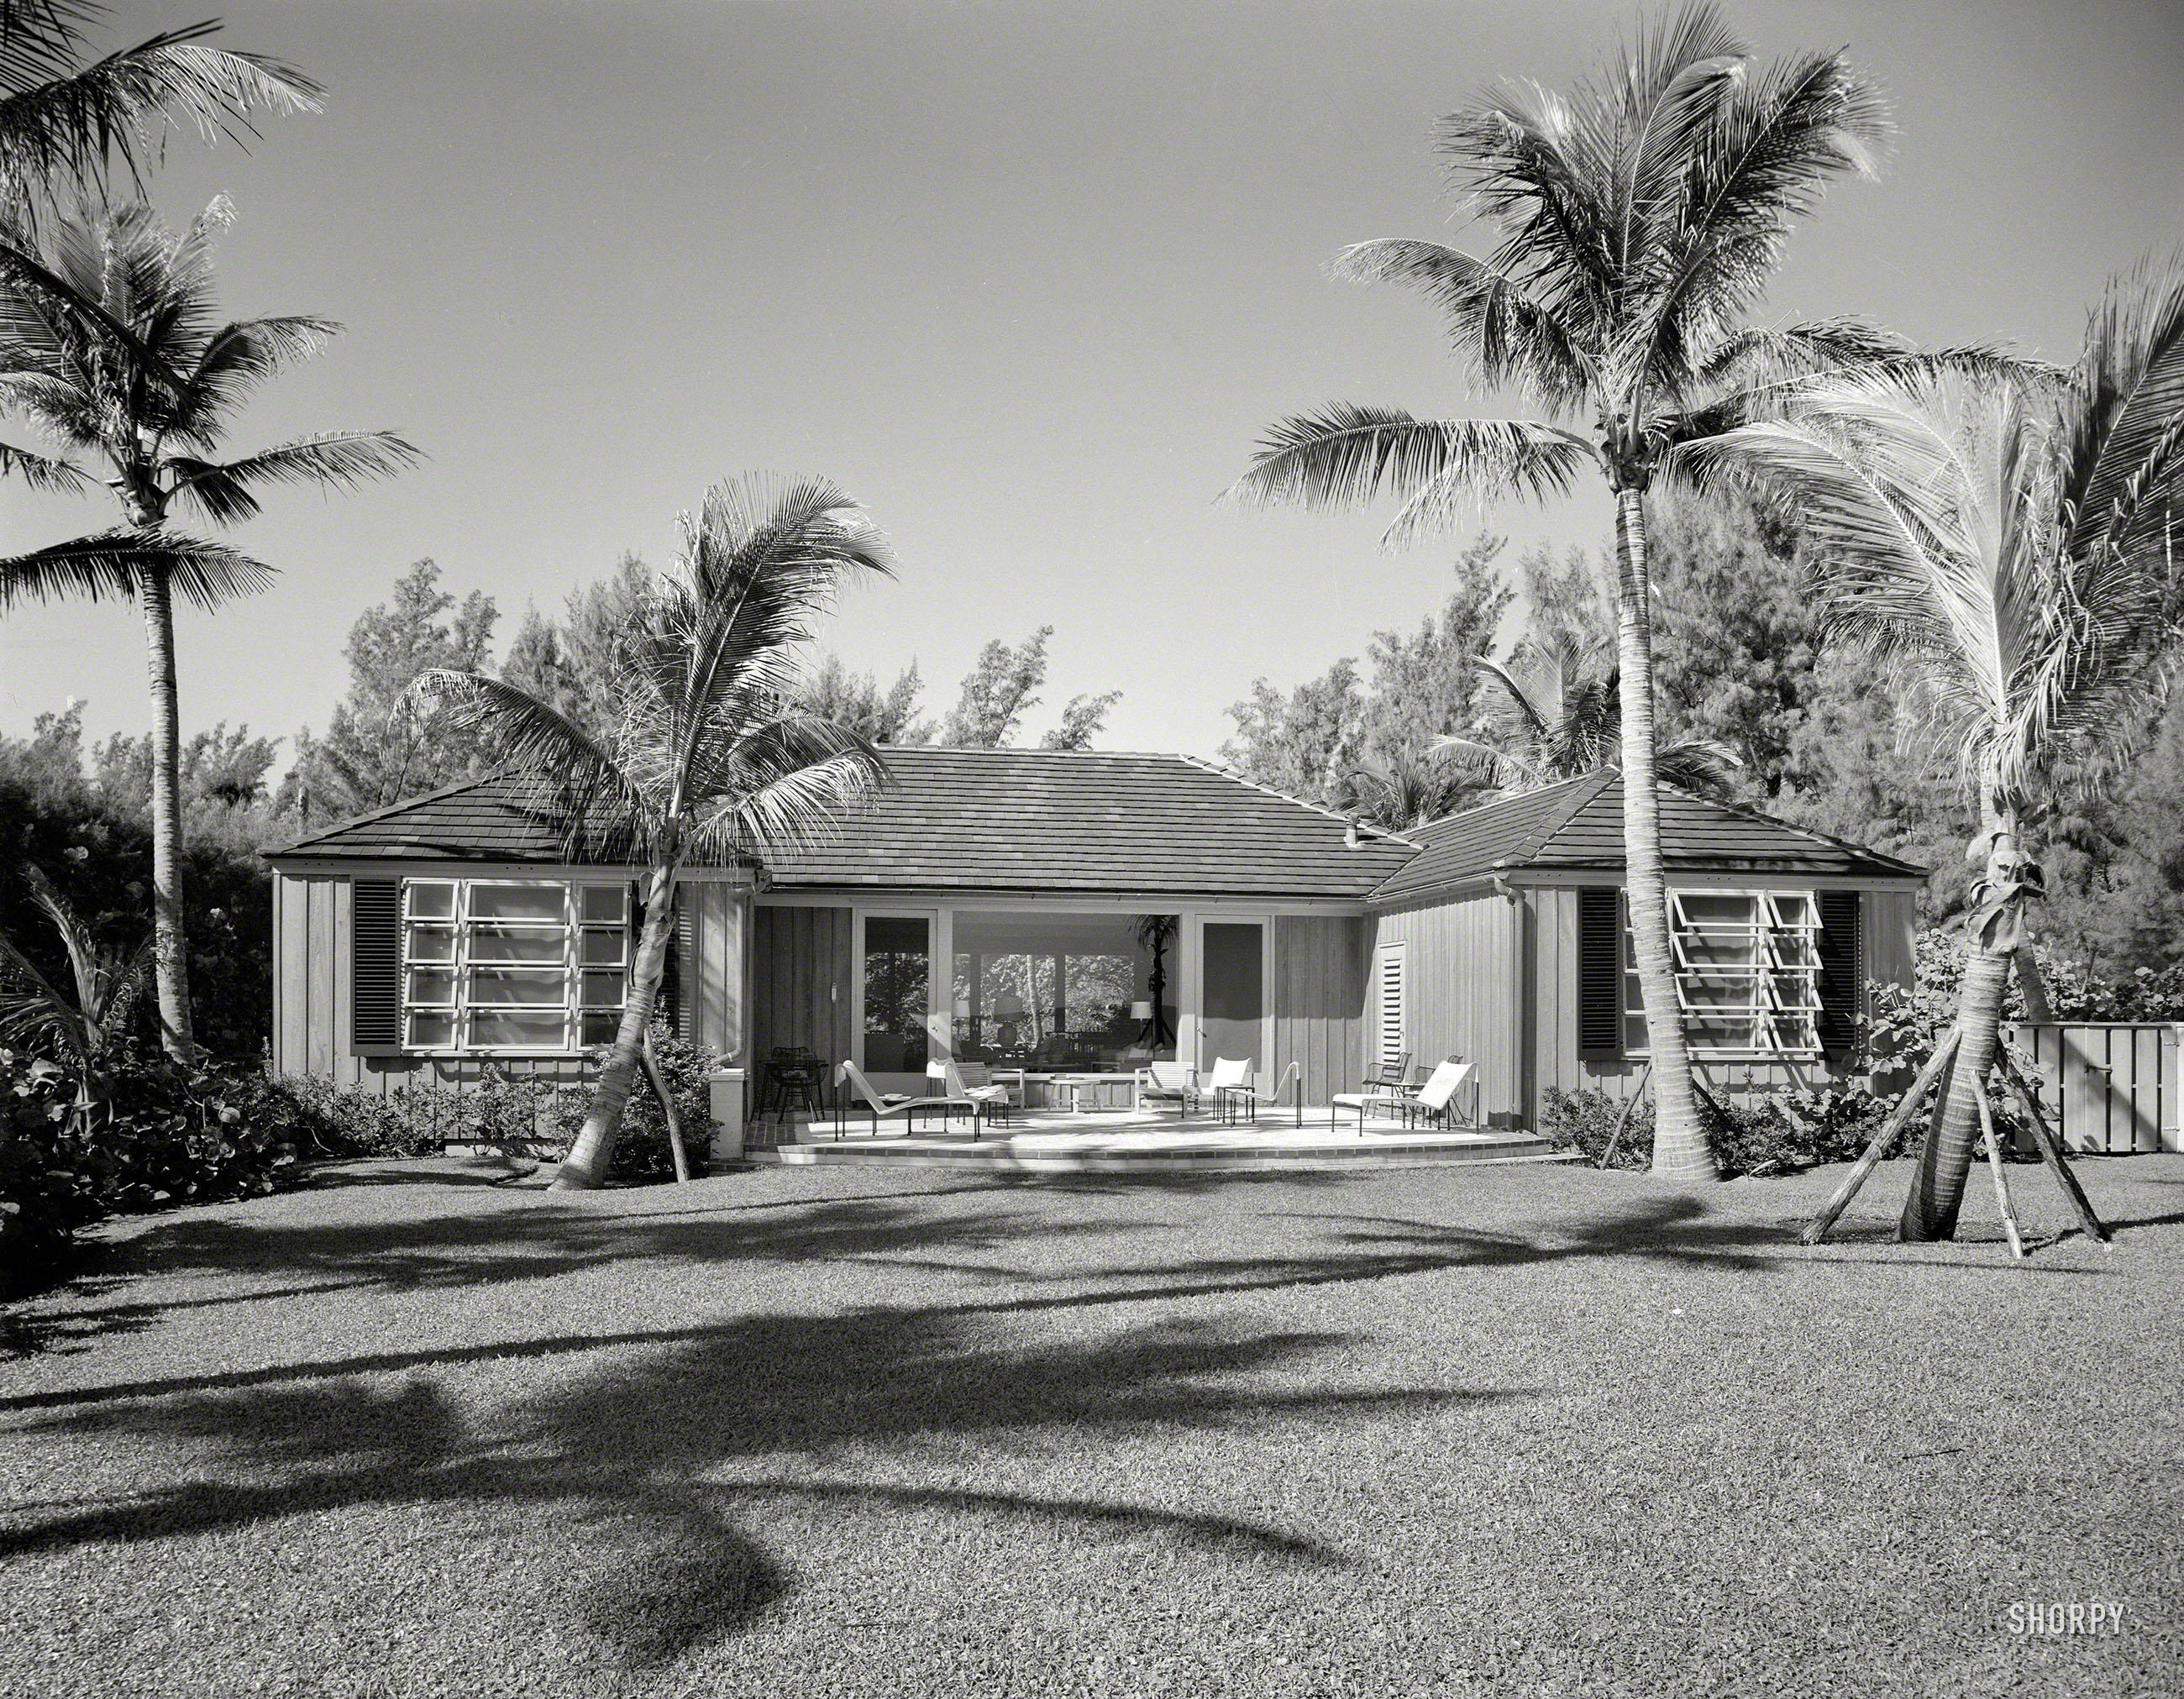 Feb. 23, 1959. "Salisbury, residence in Hobe Sound, Fla. Ocean facade. William Kemp Caler, architect. For House Beautiful." The cocktail hour commences on the patio in five minutes. 5x7 inch negative by Gottscho-Schleisner. View full size.